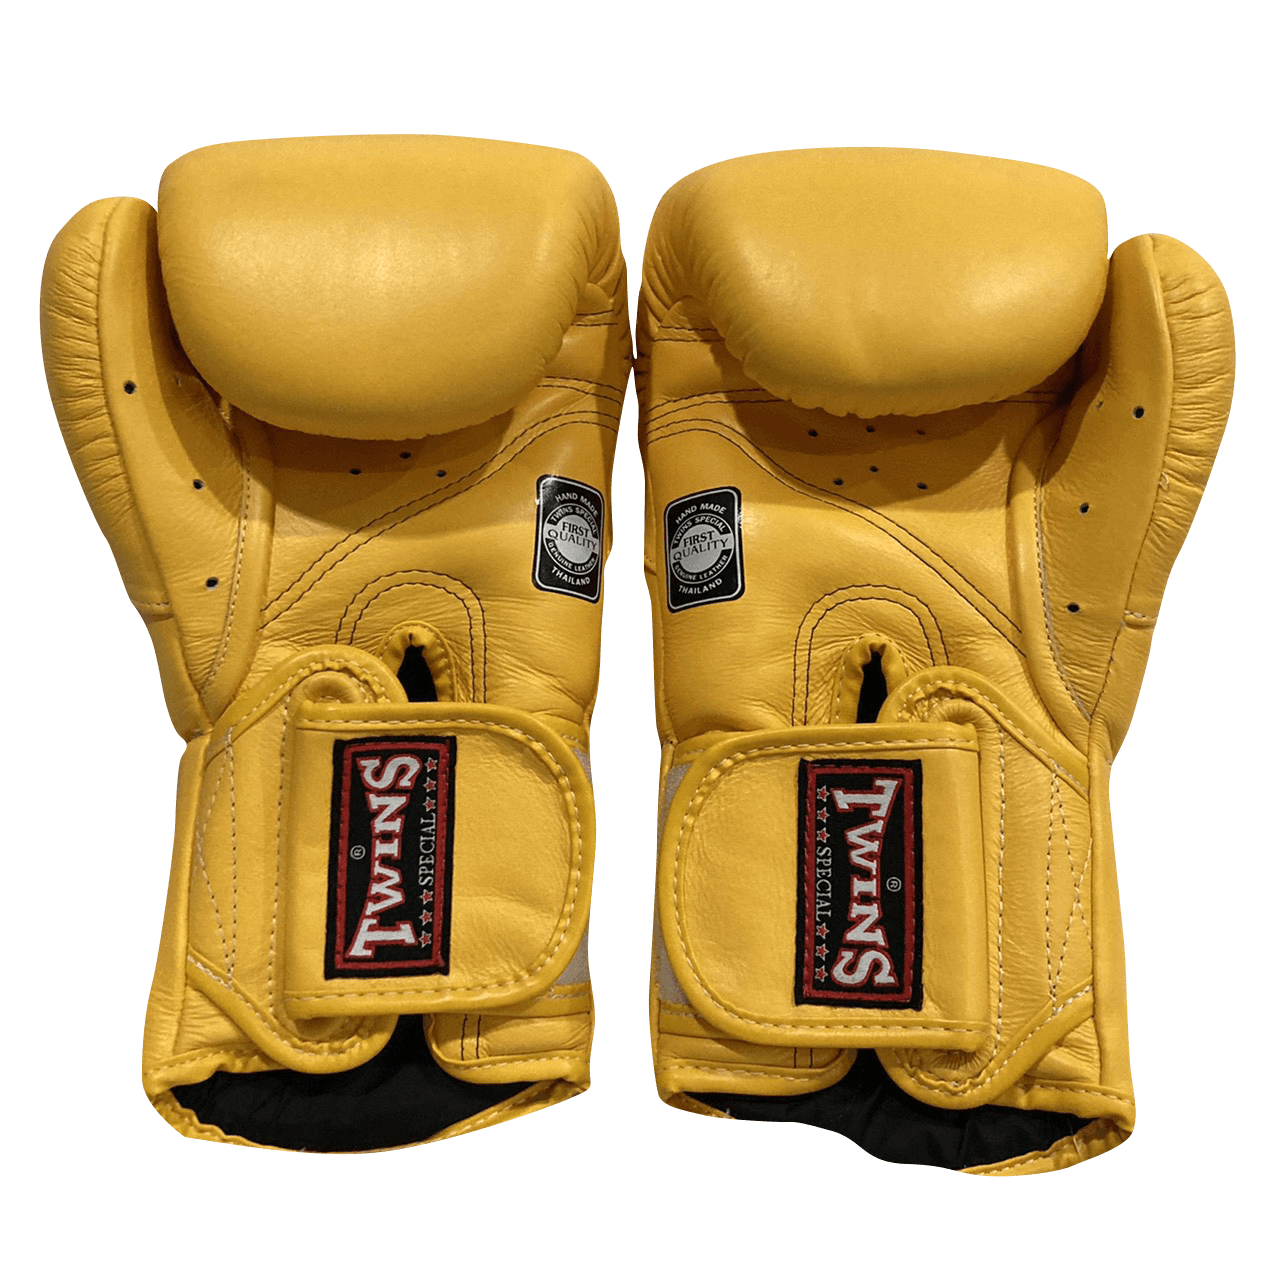 Twins Special Boxing Gloves BGVL6 Yellow - SUPER EXPORT SHOP